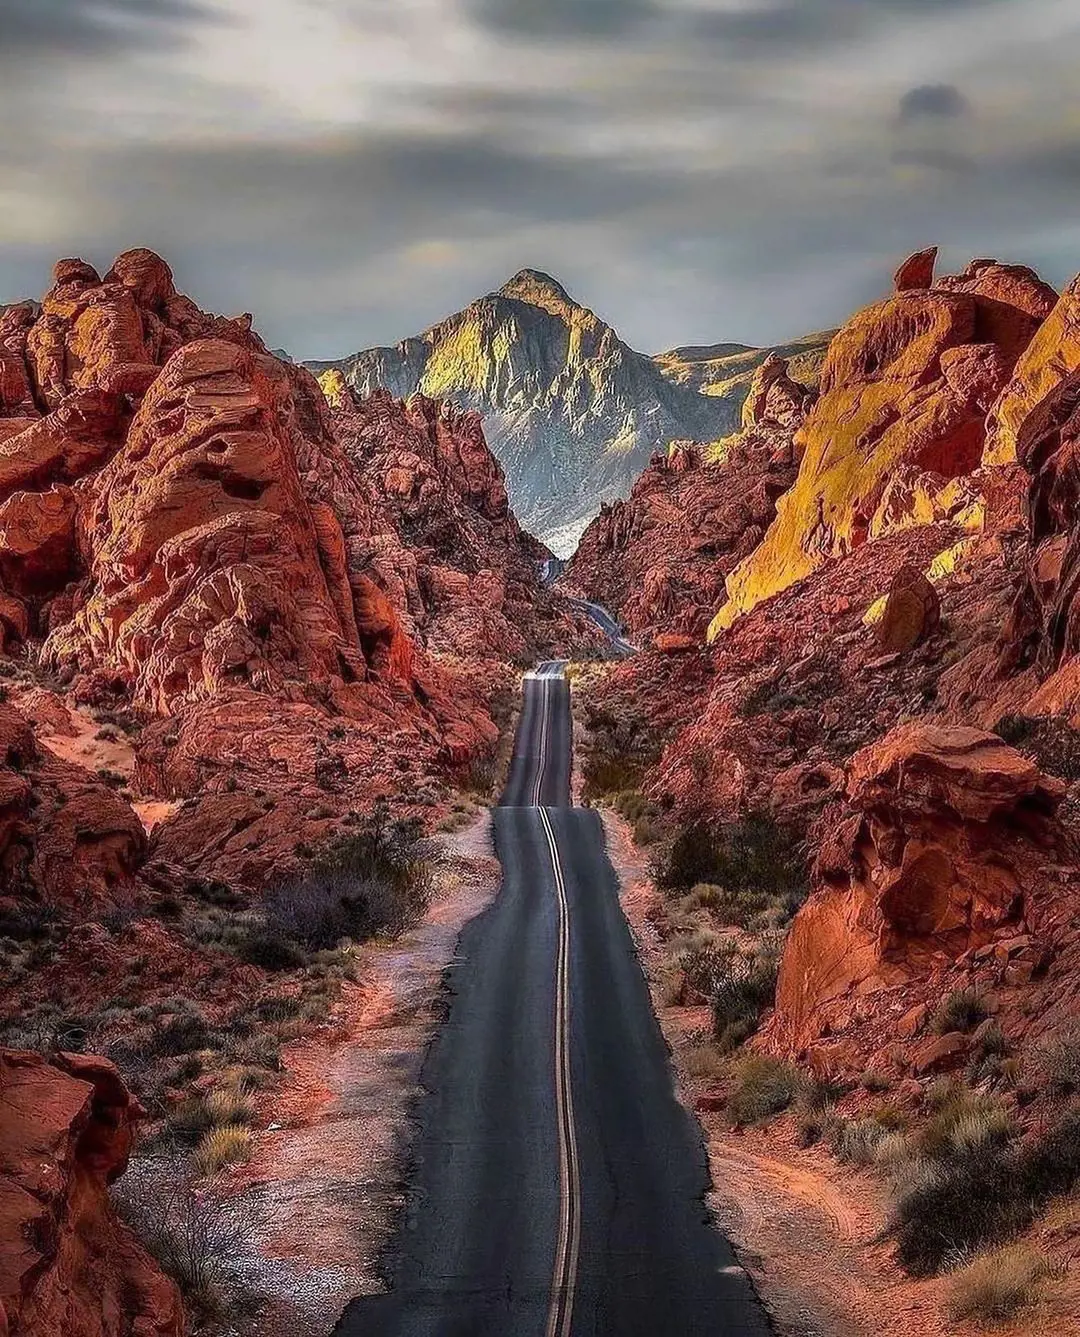 The beautiful view of the road at Valley of Fire State Park and the image clicked by photographer Daniel Kaufman